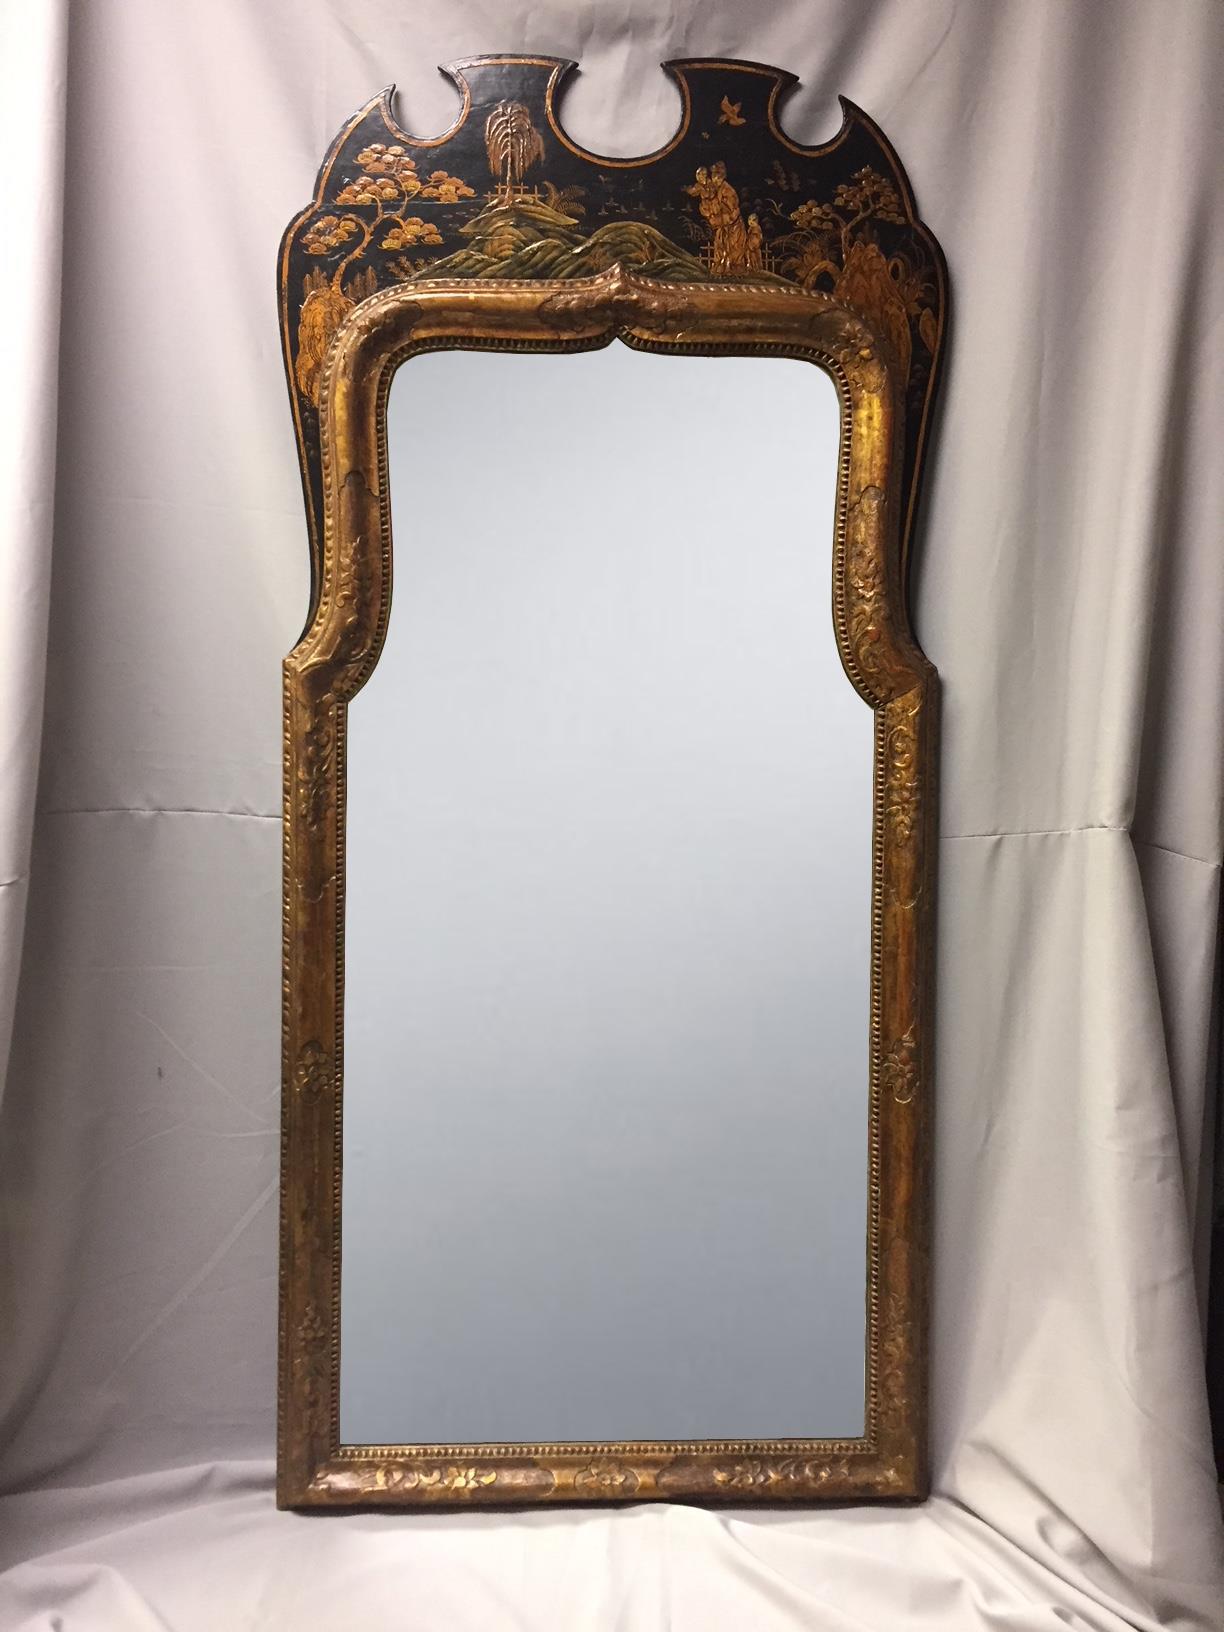 Beautiful and large 19th century English Queen Anne style japanned mirror. Lacquered and gilt decorated uniquely shaped surmount depicting an Asian family in a garden over mirror plate within an attractive carved giltwood frame.
Possibly 18th